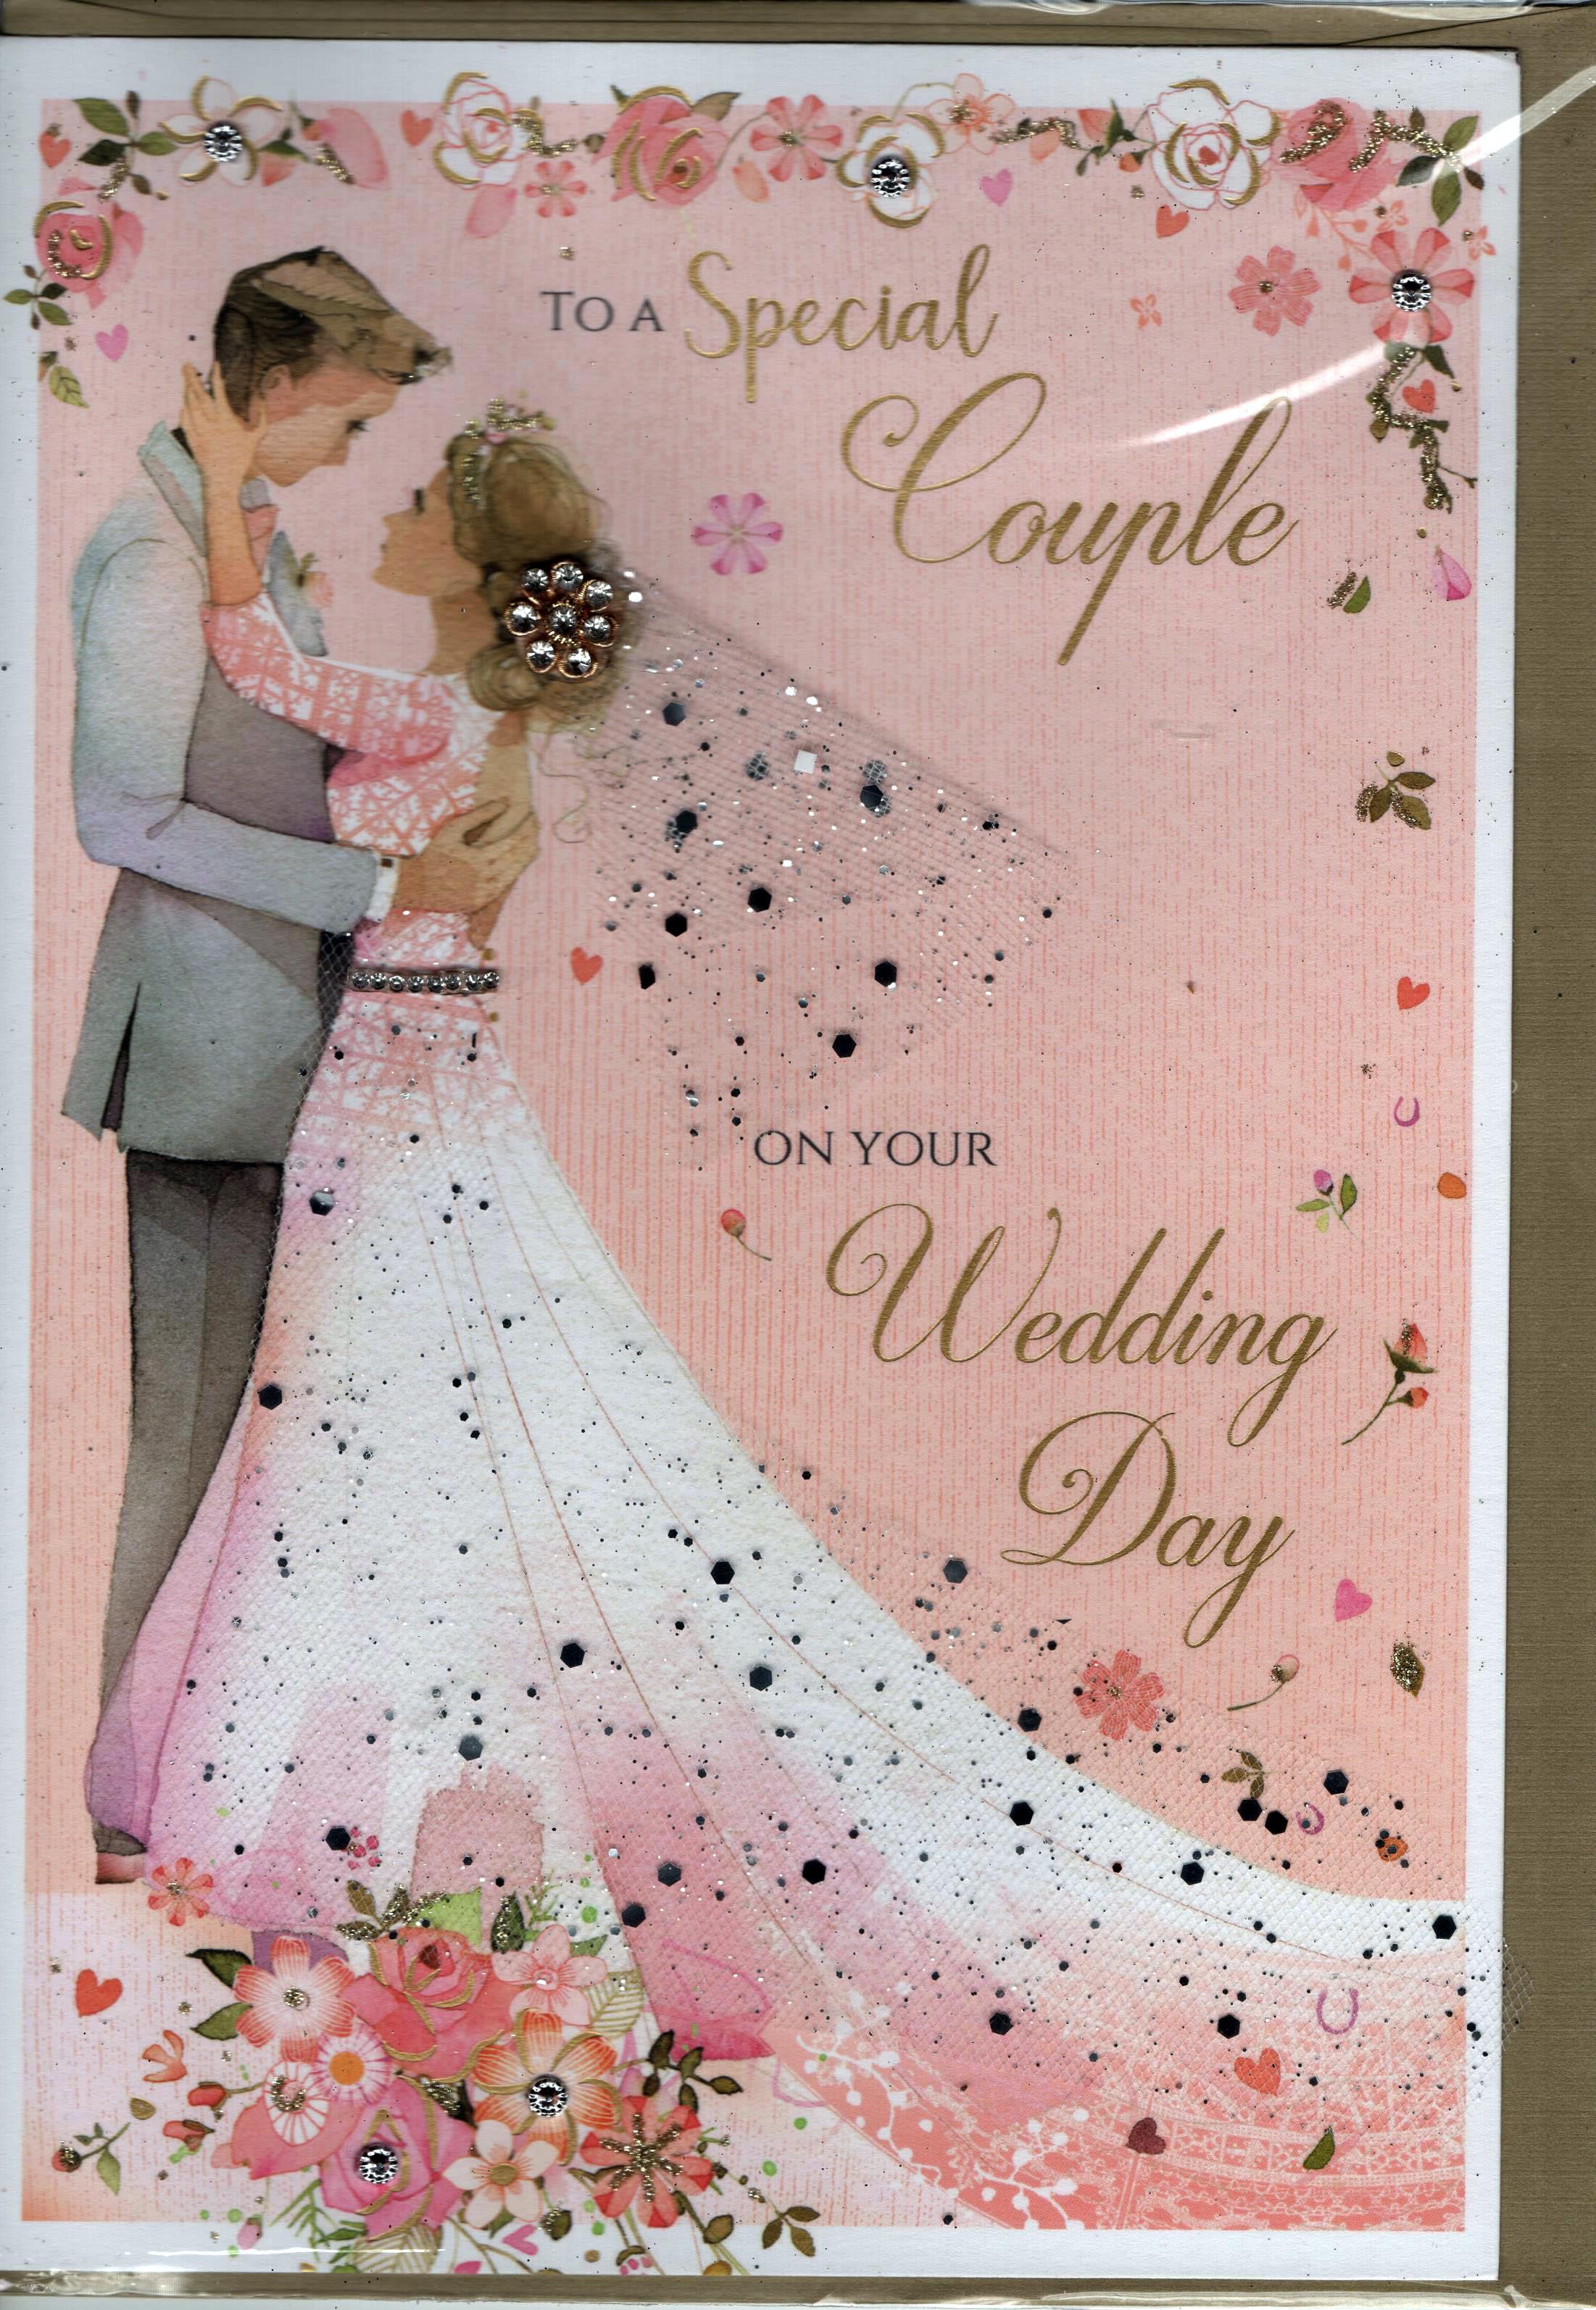 To a Special Cople On Your Wedding Day